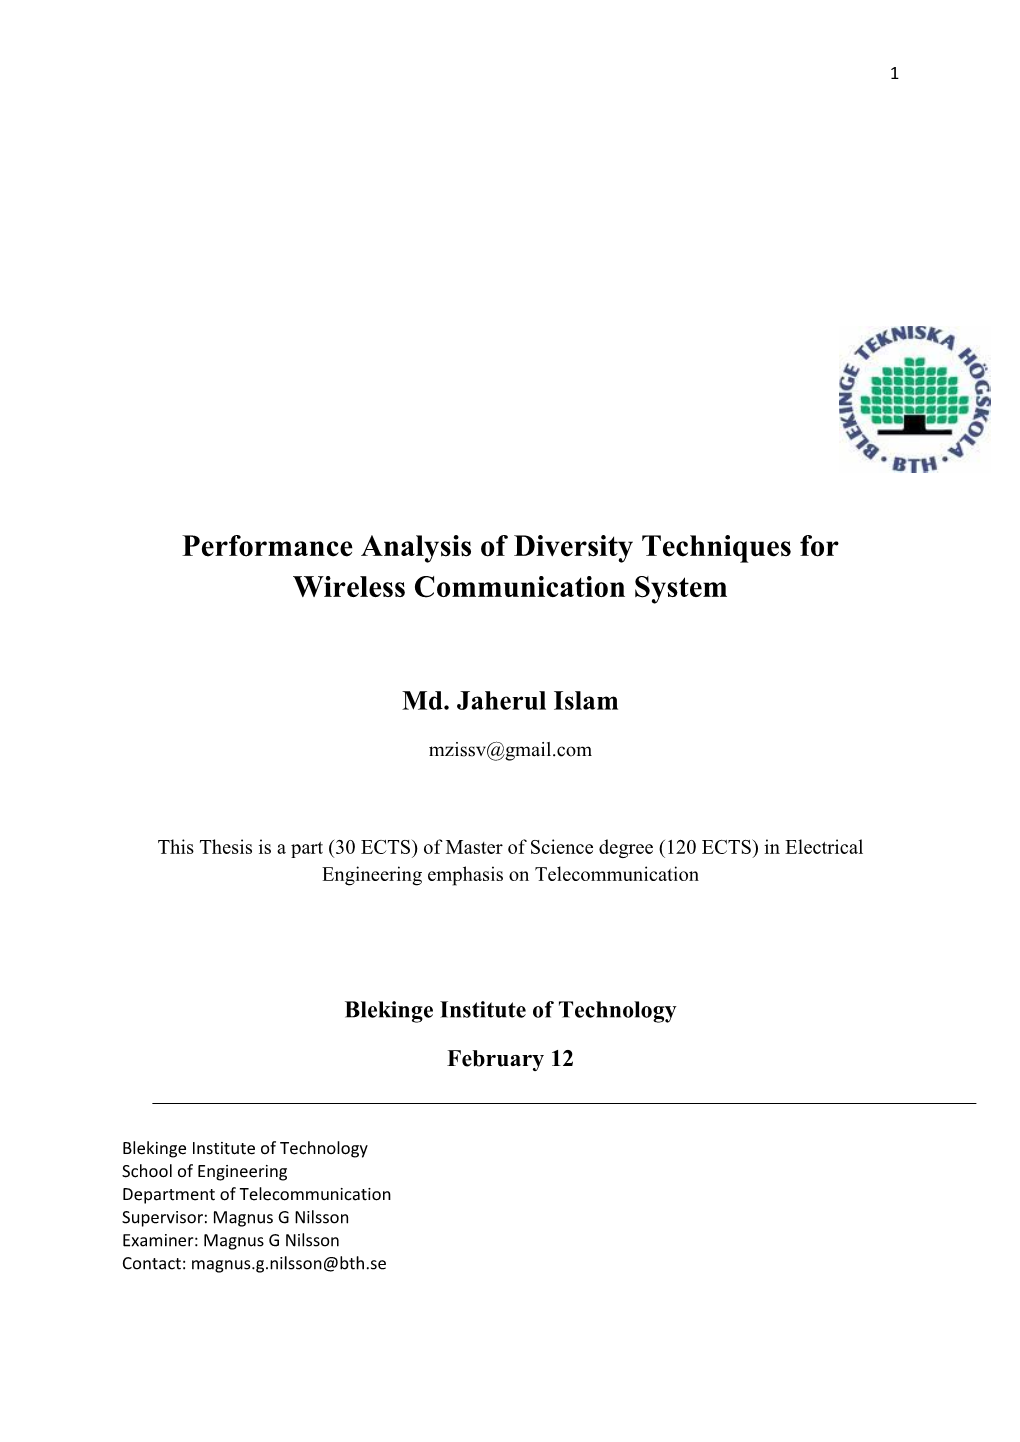 Performance Analysis of Diversity Techniques for Wireless Communication System